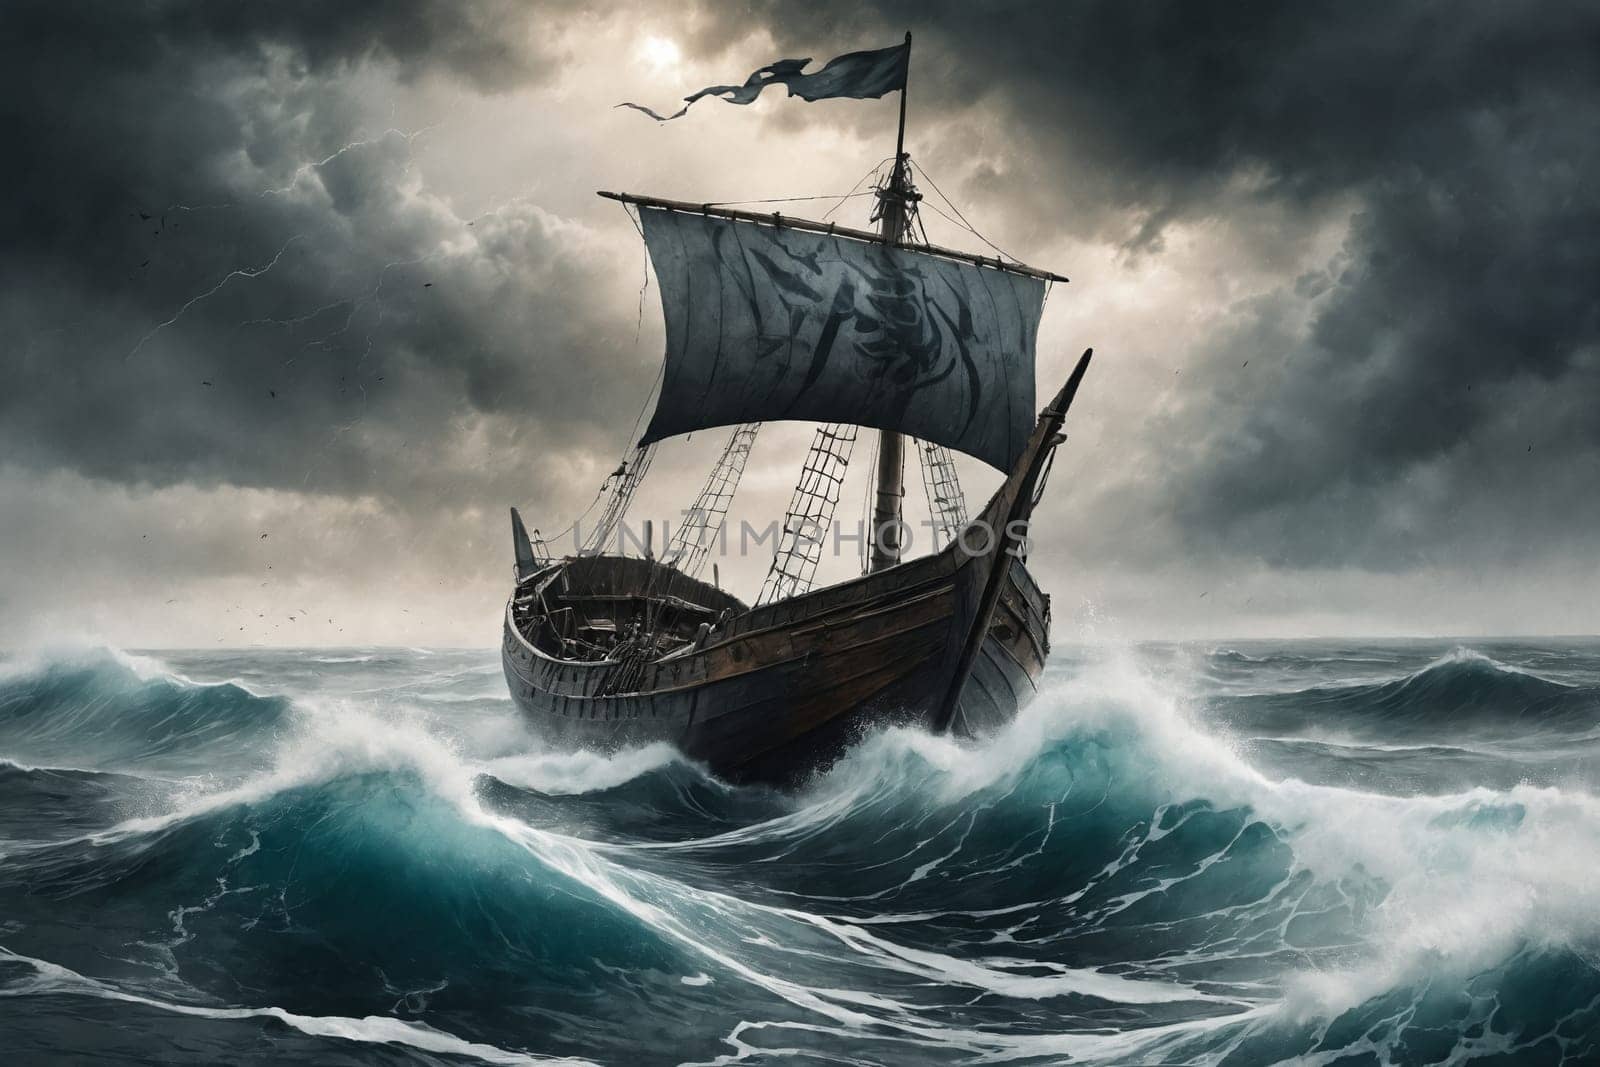 Spirit of the Norsemen: Navigating through Stormy Seas by Andre1ns